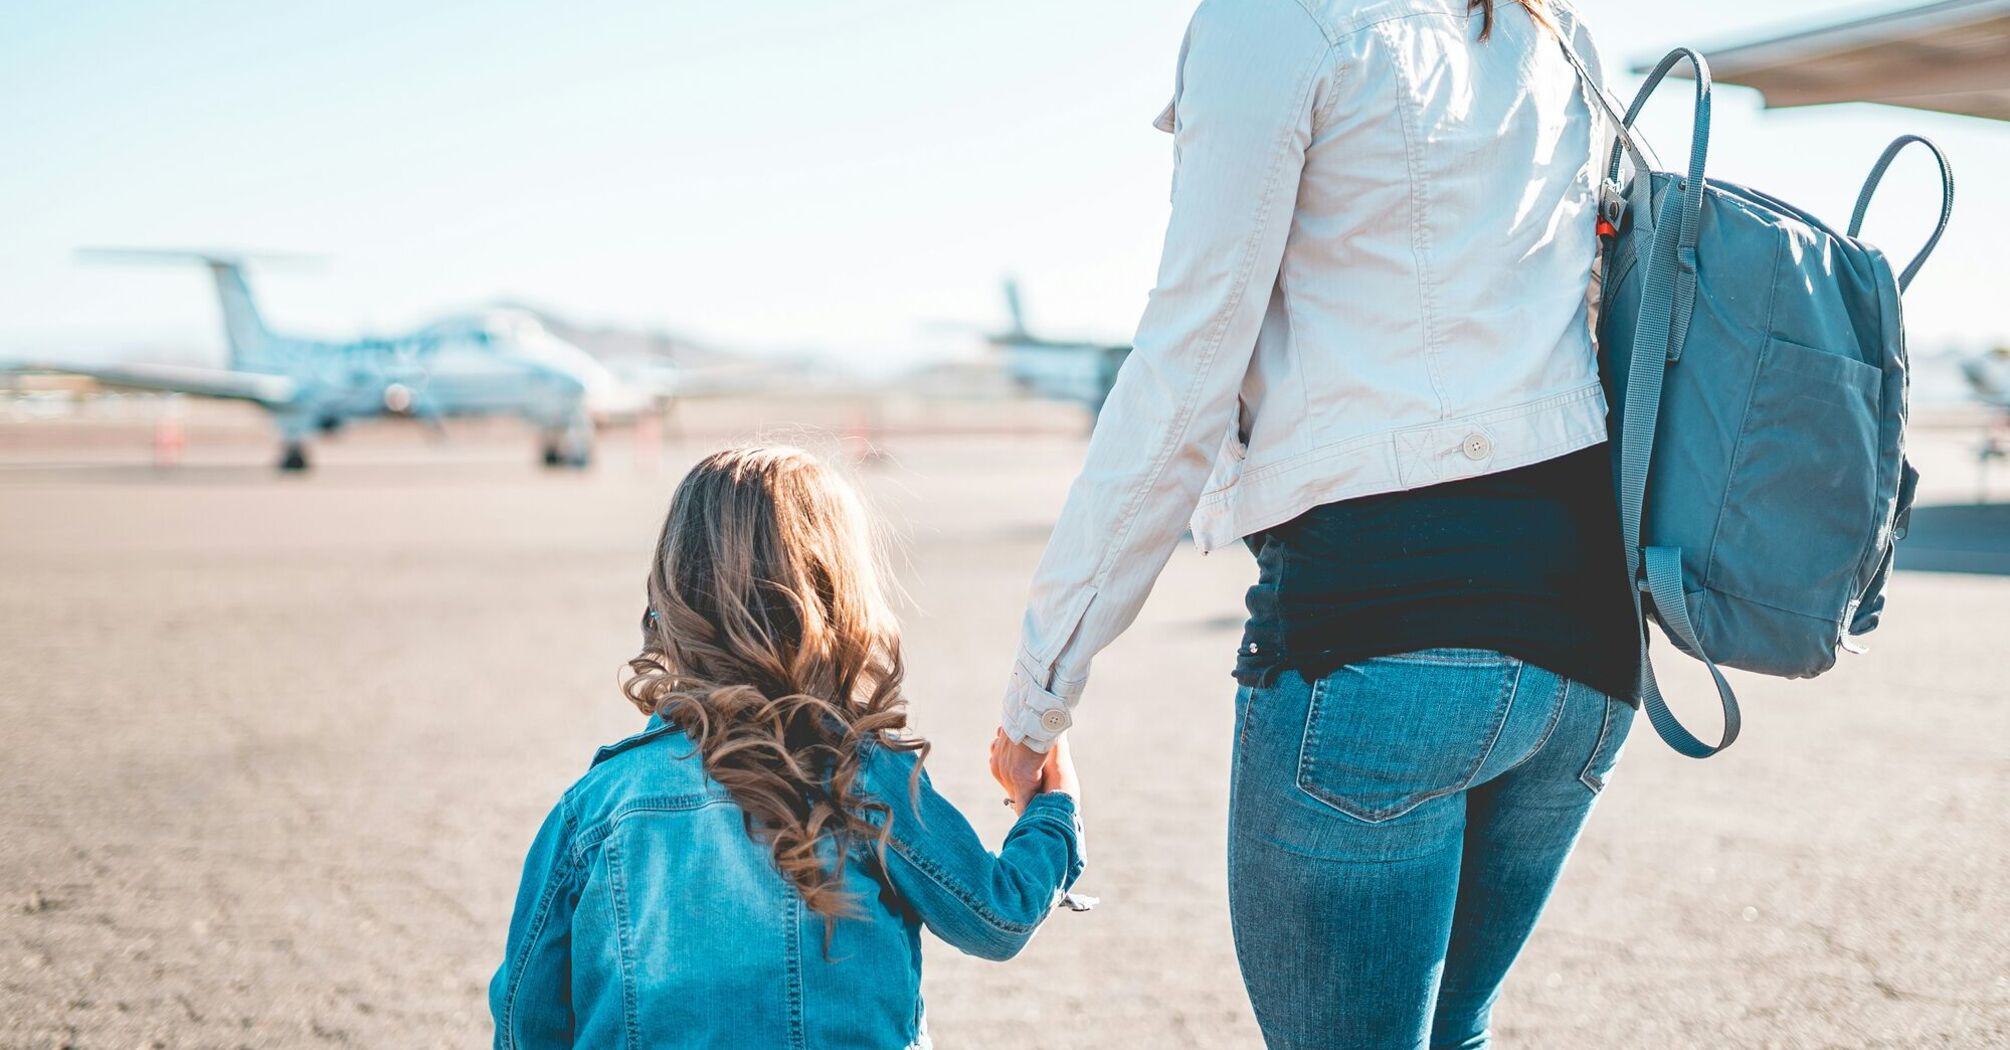 A mother and her young daughter holding hands on an airfield, with small planes in the background